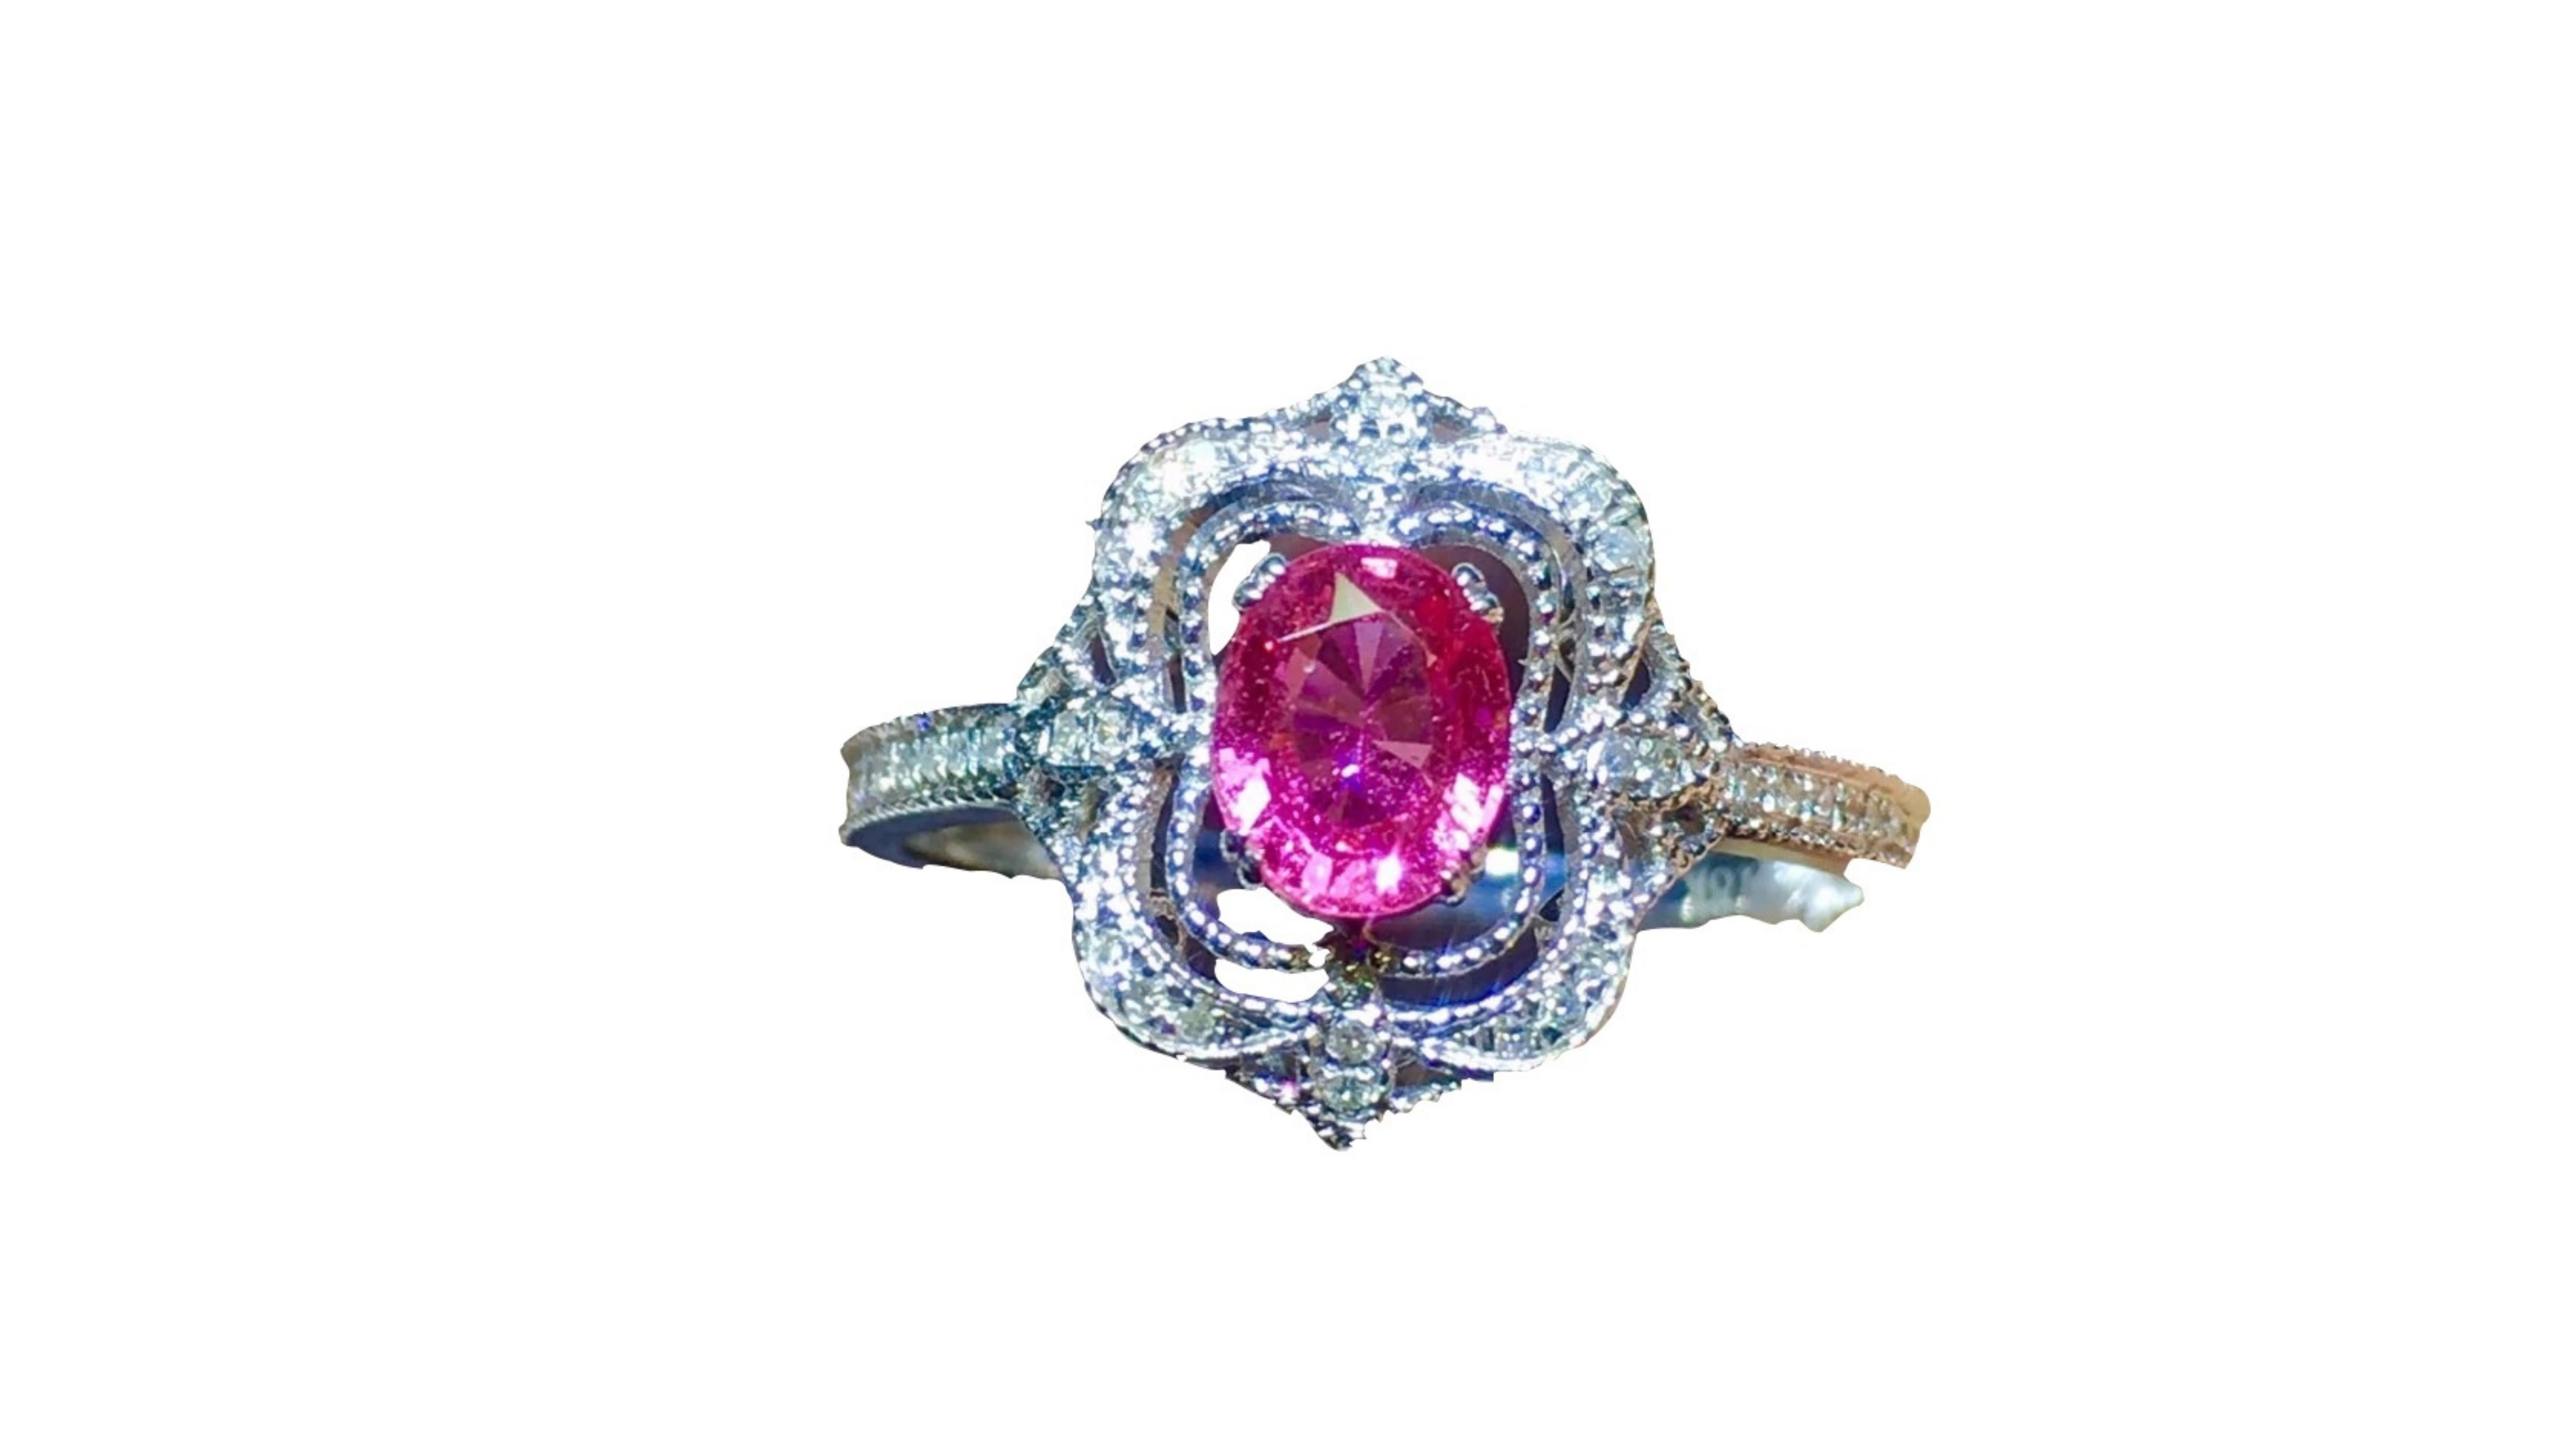 
0.62 Carat Pink Sapphire Ring 18 Karat White Gold with over 22  White diamonds and ones on each side of the band. This is a lot of detail as you can see around the main stone.

 Pink sapphires have been exponentially increasing in popularity as a